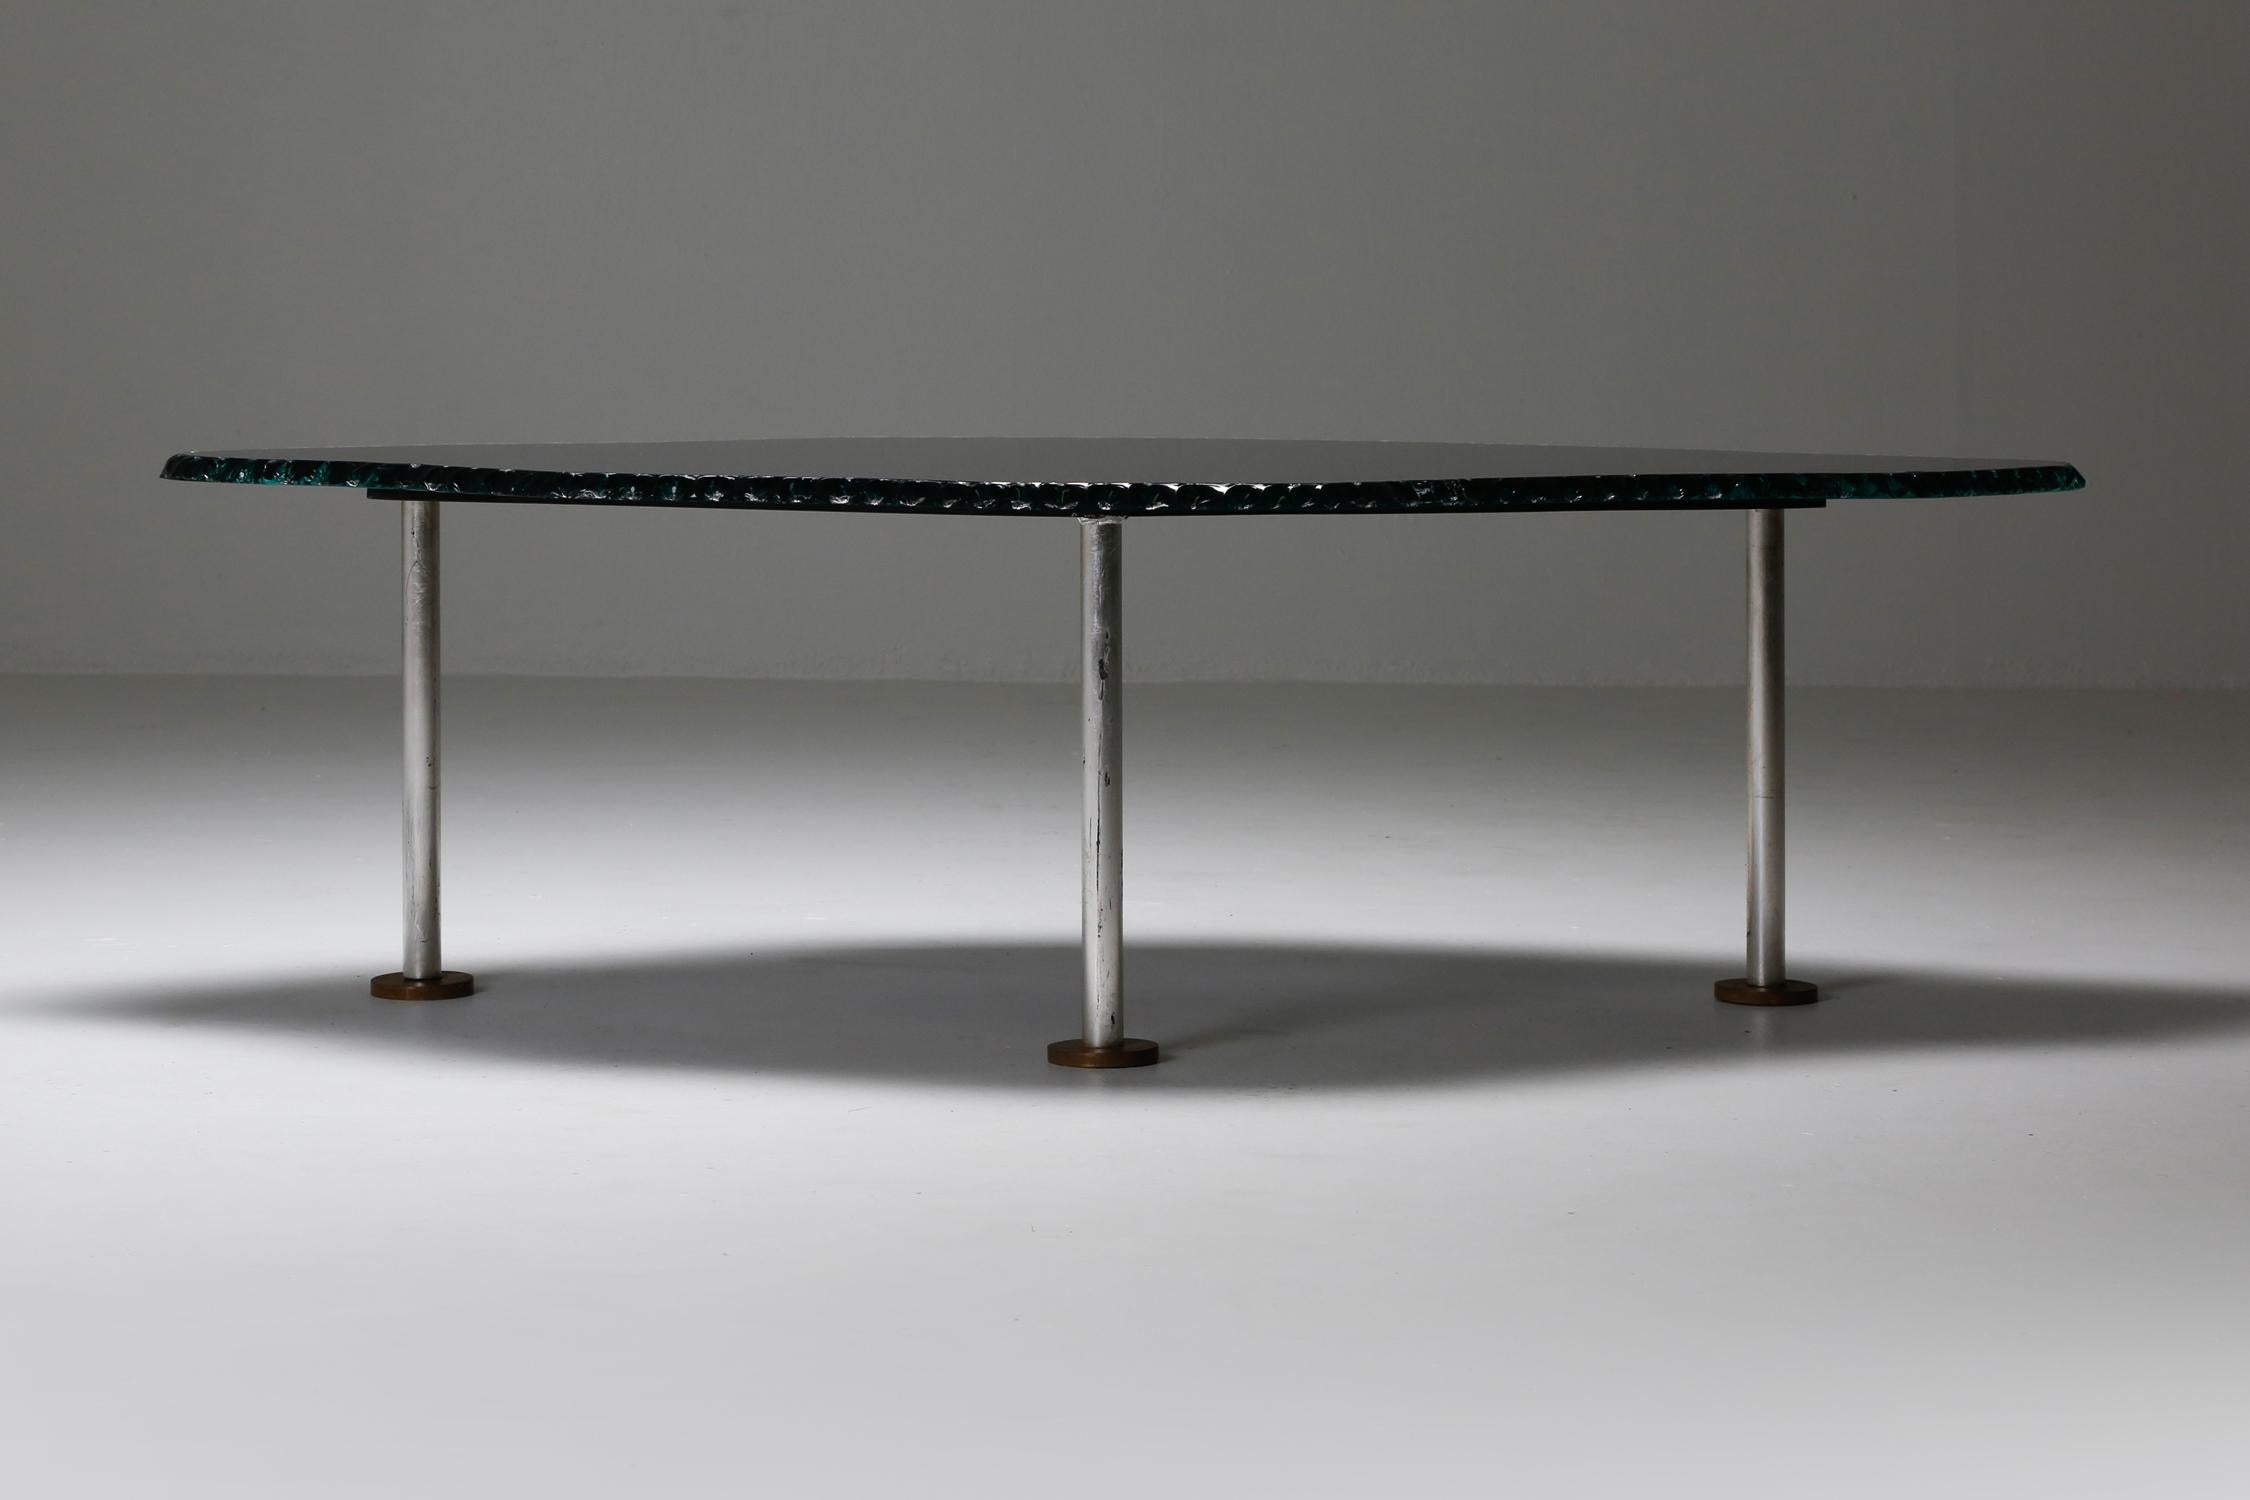 Italian post-modern coffee table, a true masterpiece that encapsulates the spirit of the 1980s design era. Featuring three sleek chrome legs and an imperfect glass tabletop, this coffee table adds a unique and avant-garde touch to your living space.